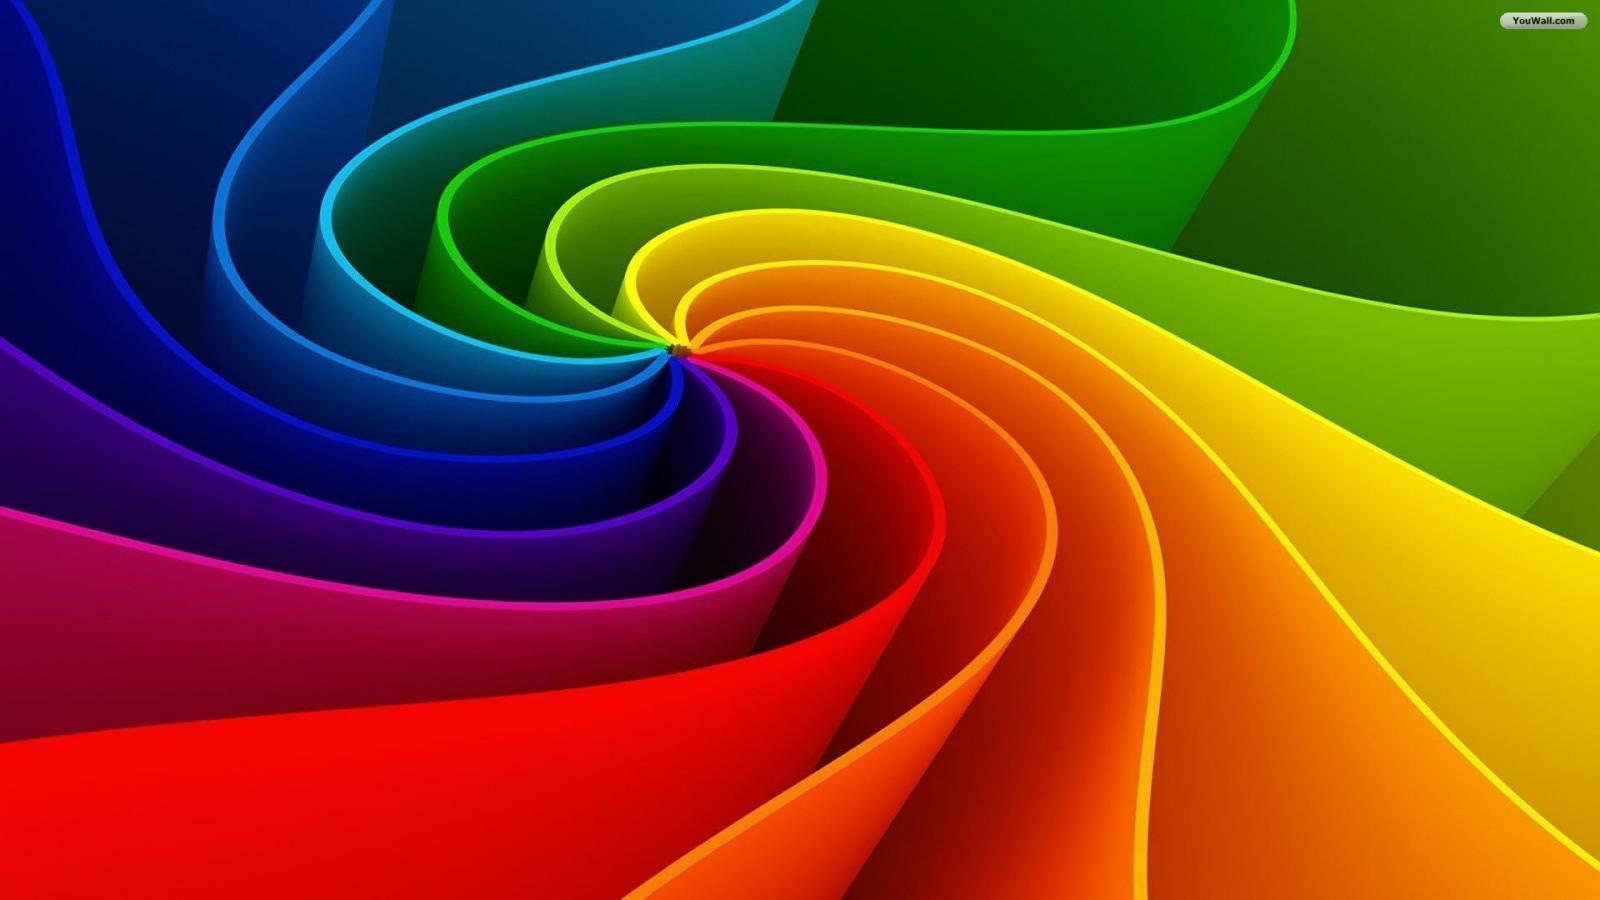 Rainbow Splinters Abstract Wallpaper Car Picture